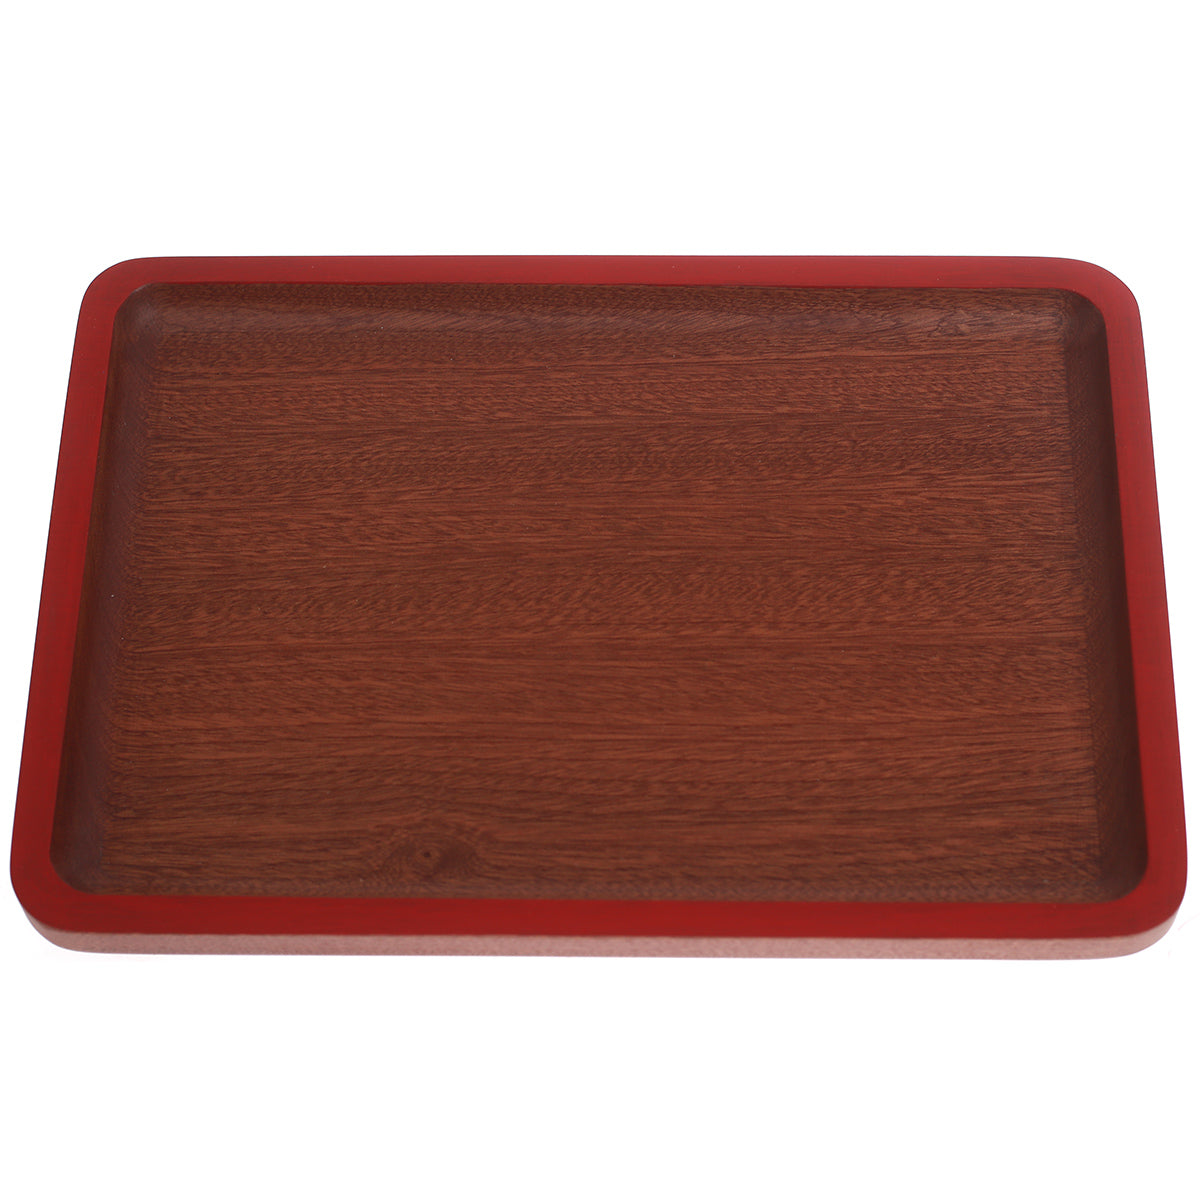 Rung Multi Wooden (13x9)(Red)